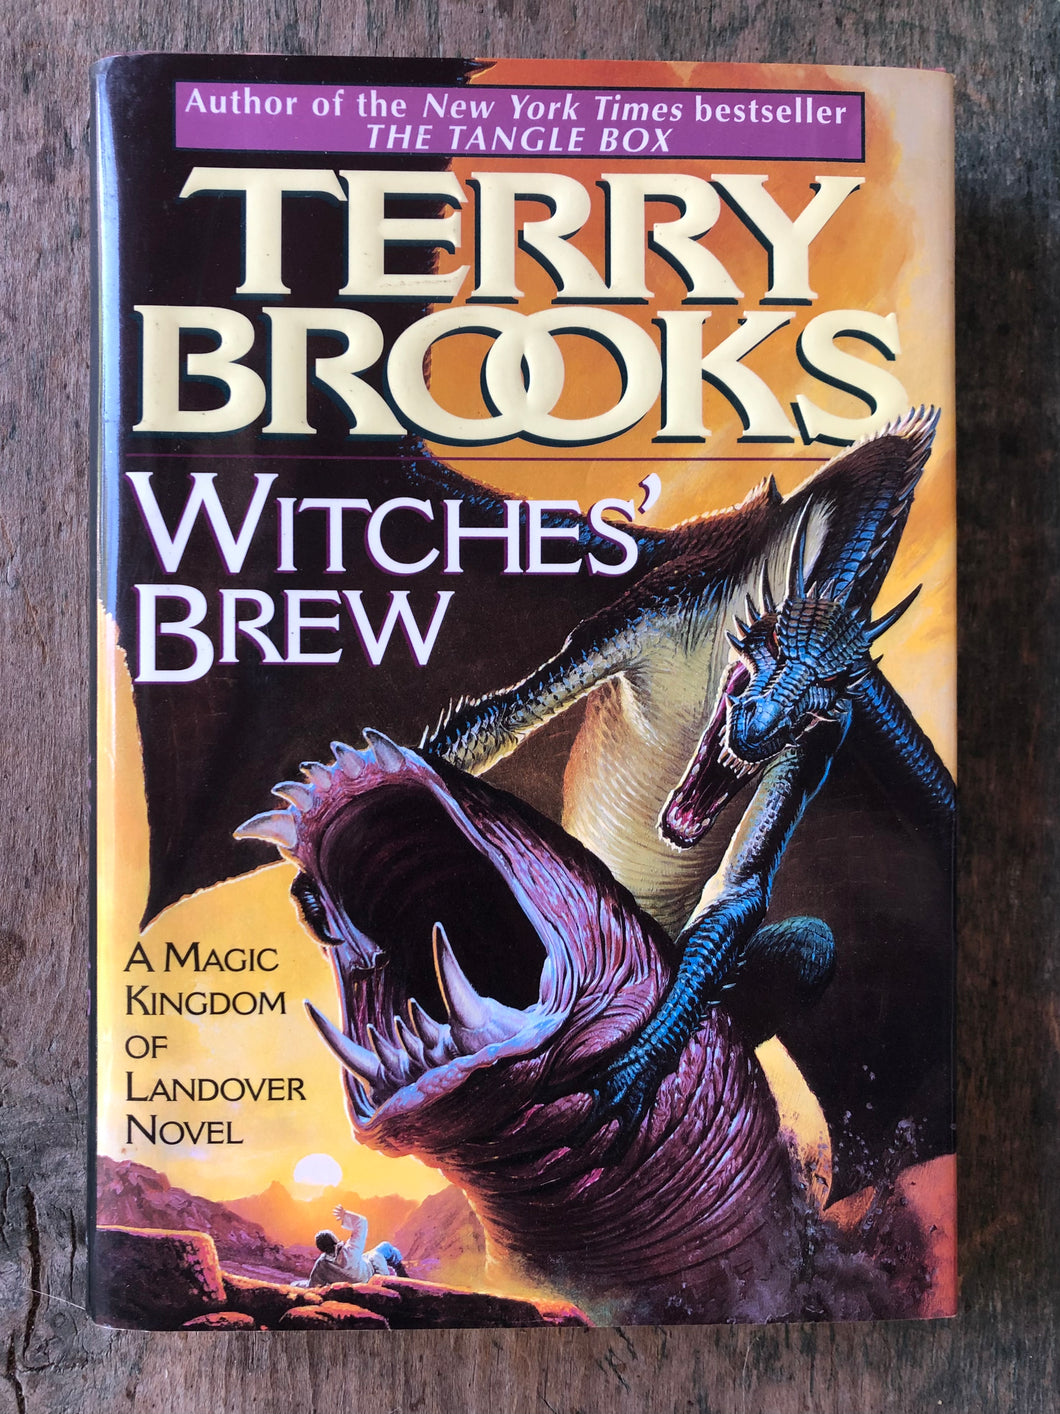 Witches' Brew: A Magic Kingdom of Landover Novel. by Terry Brooks